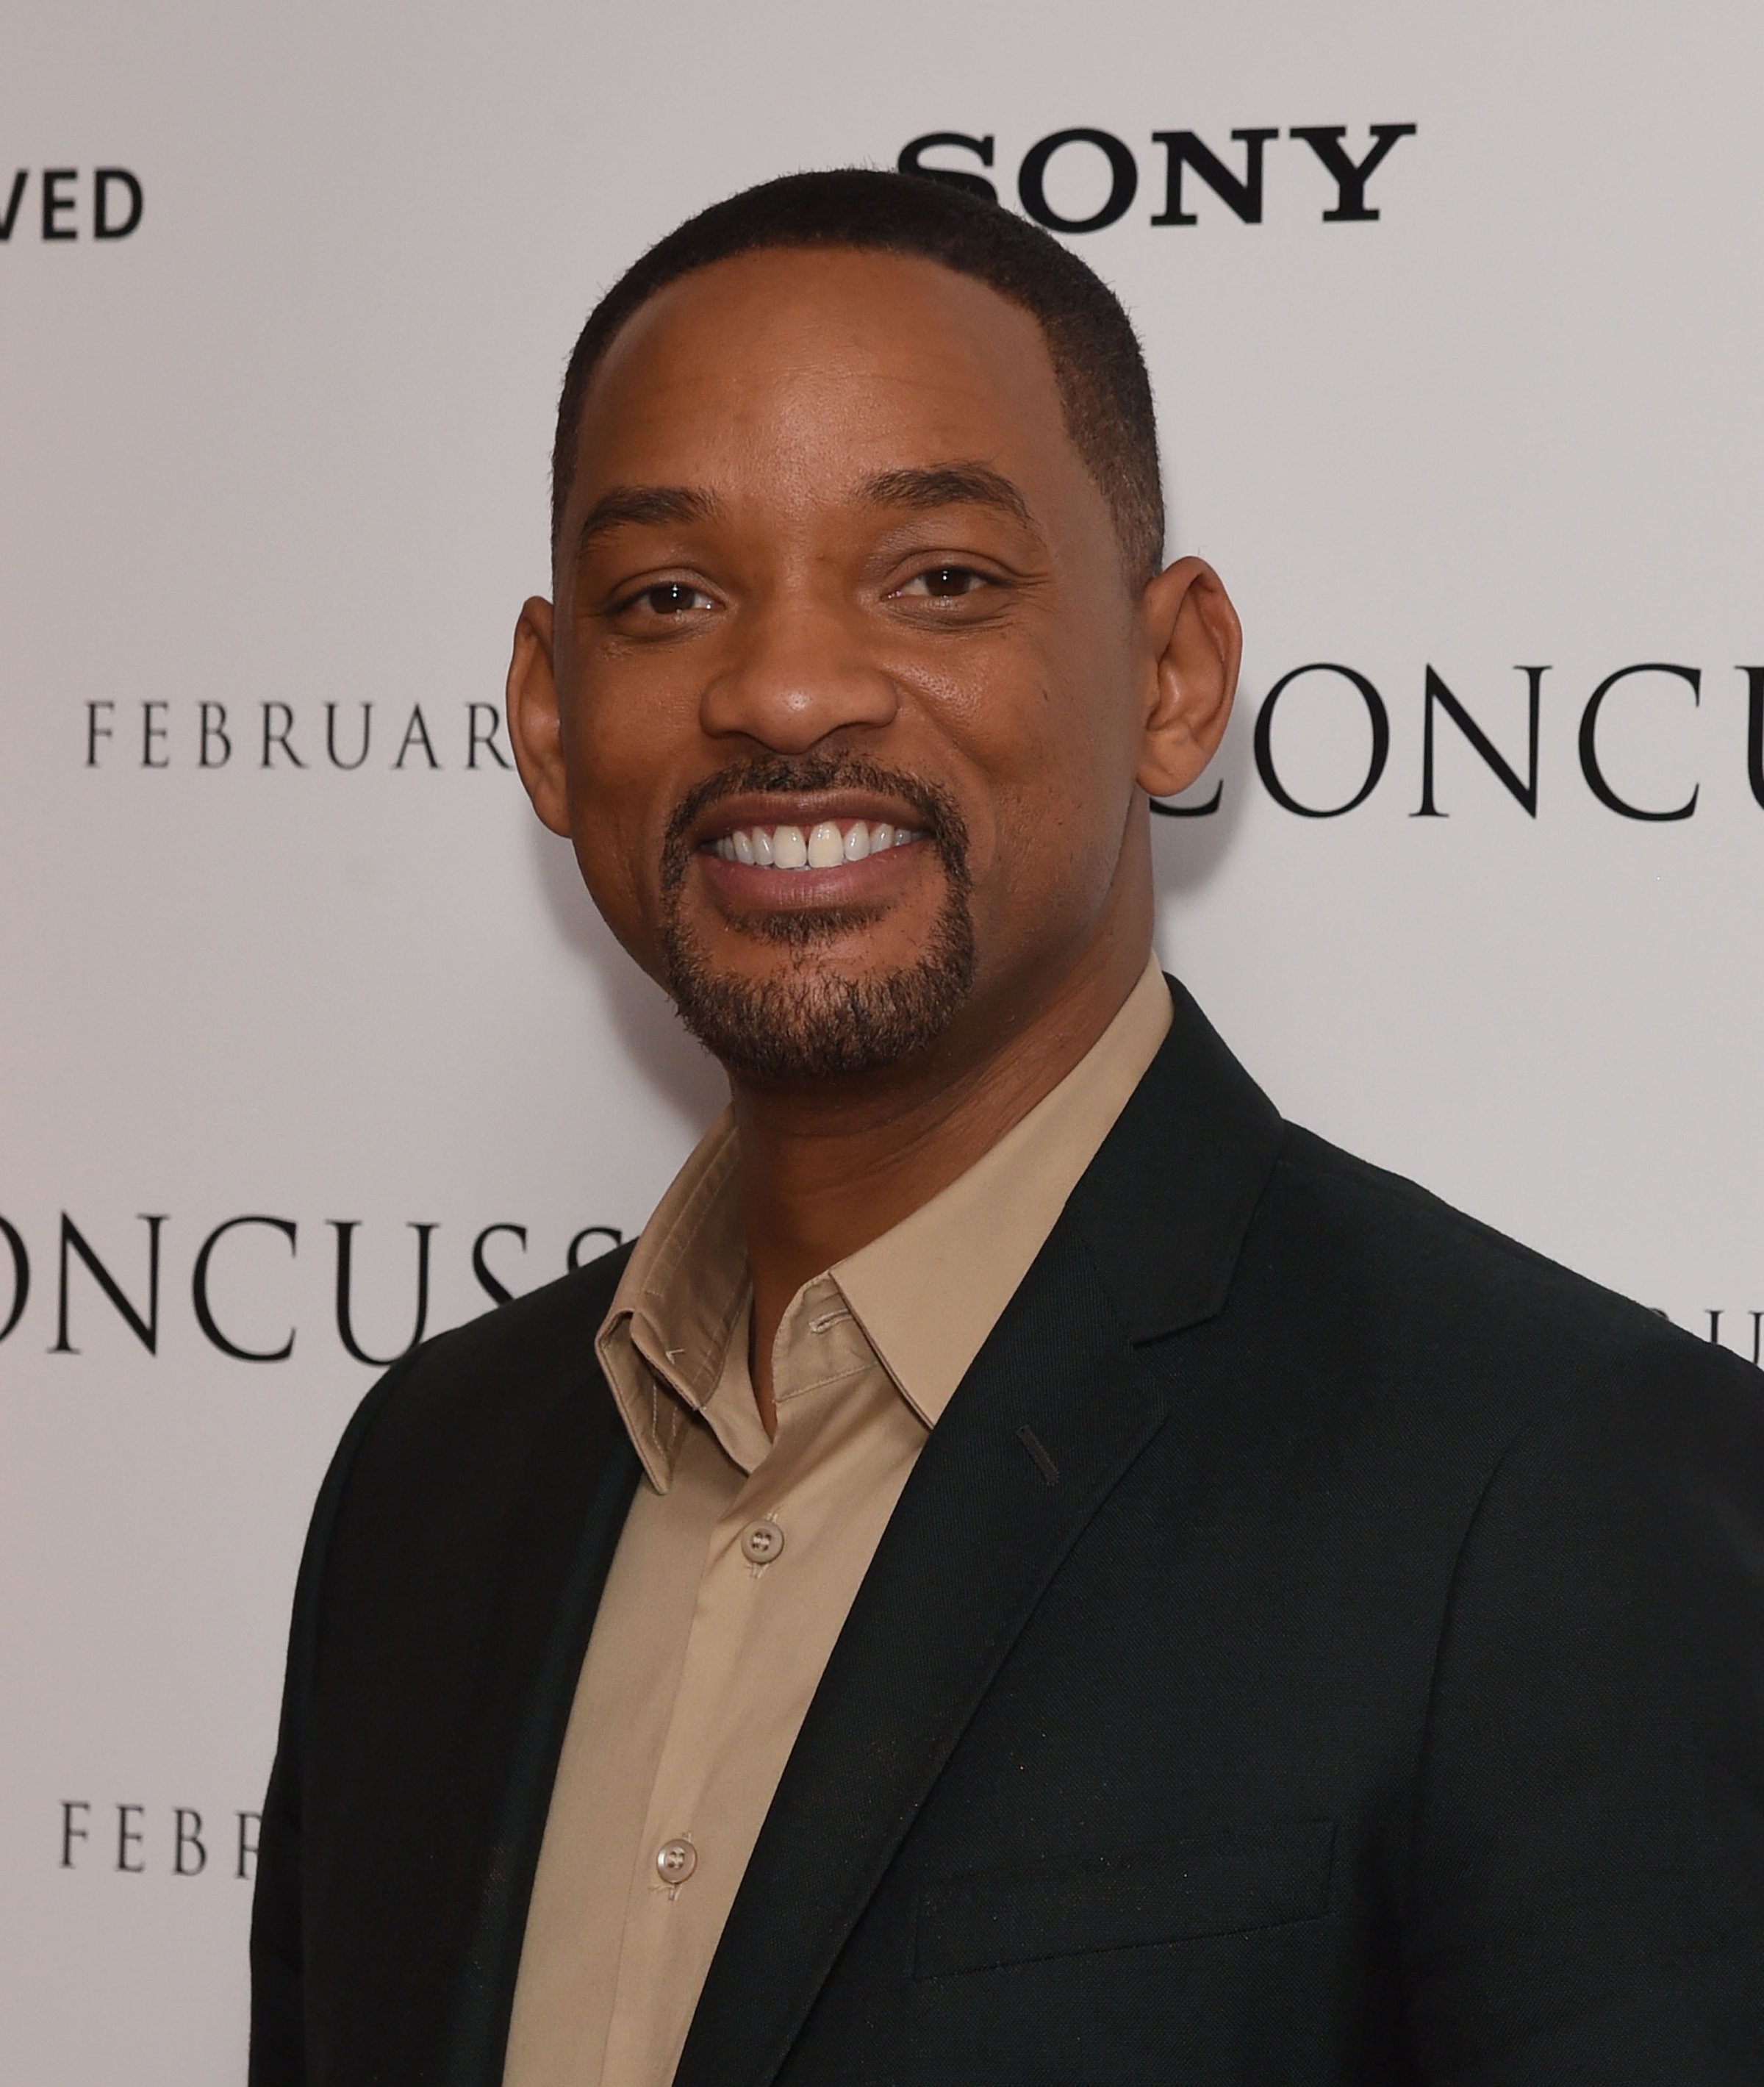 Will Smith attends a special screening of "Concussion" hosted by Will Smith, Susanna Reid and Brian Moore at The Ham Yard Hotel on January 28, 2016 in London, England.